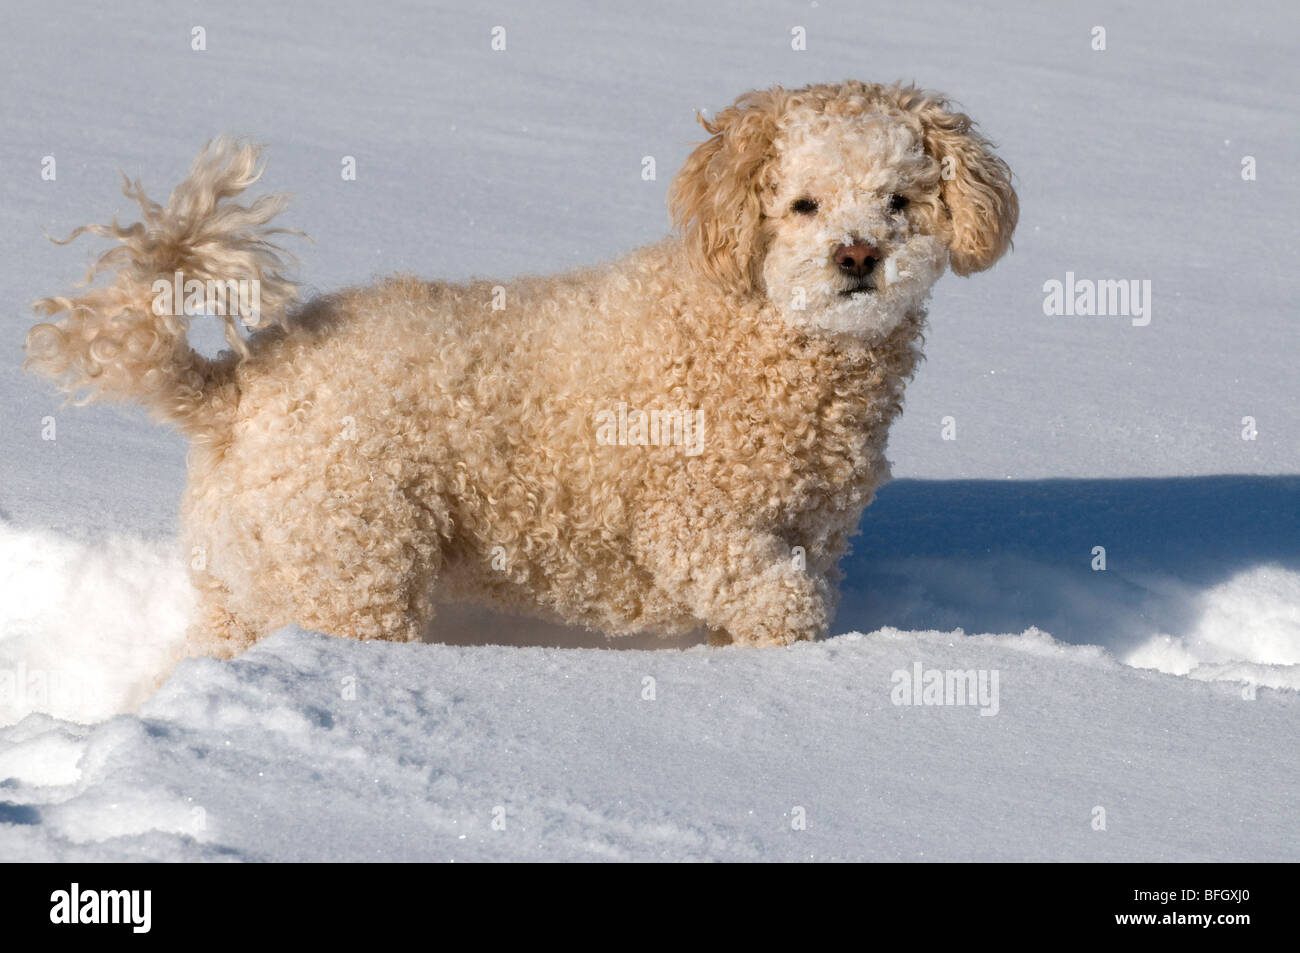 Cute poodle-bichon mix playing in the snow. Ontario, Canada. Stock Photo